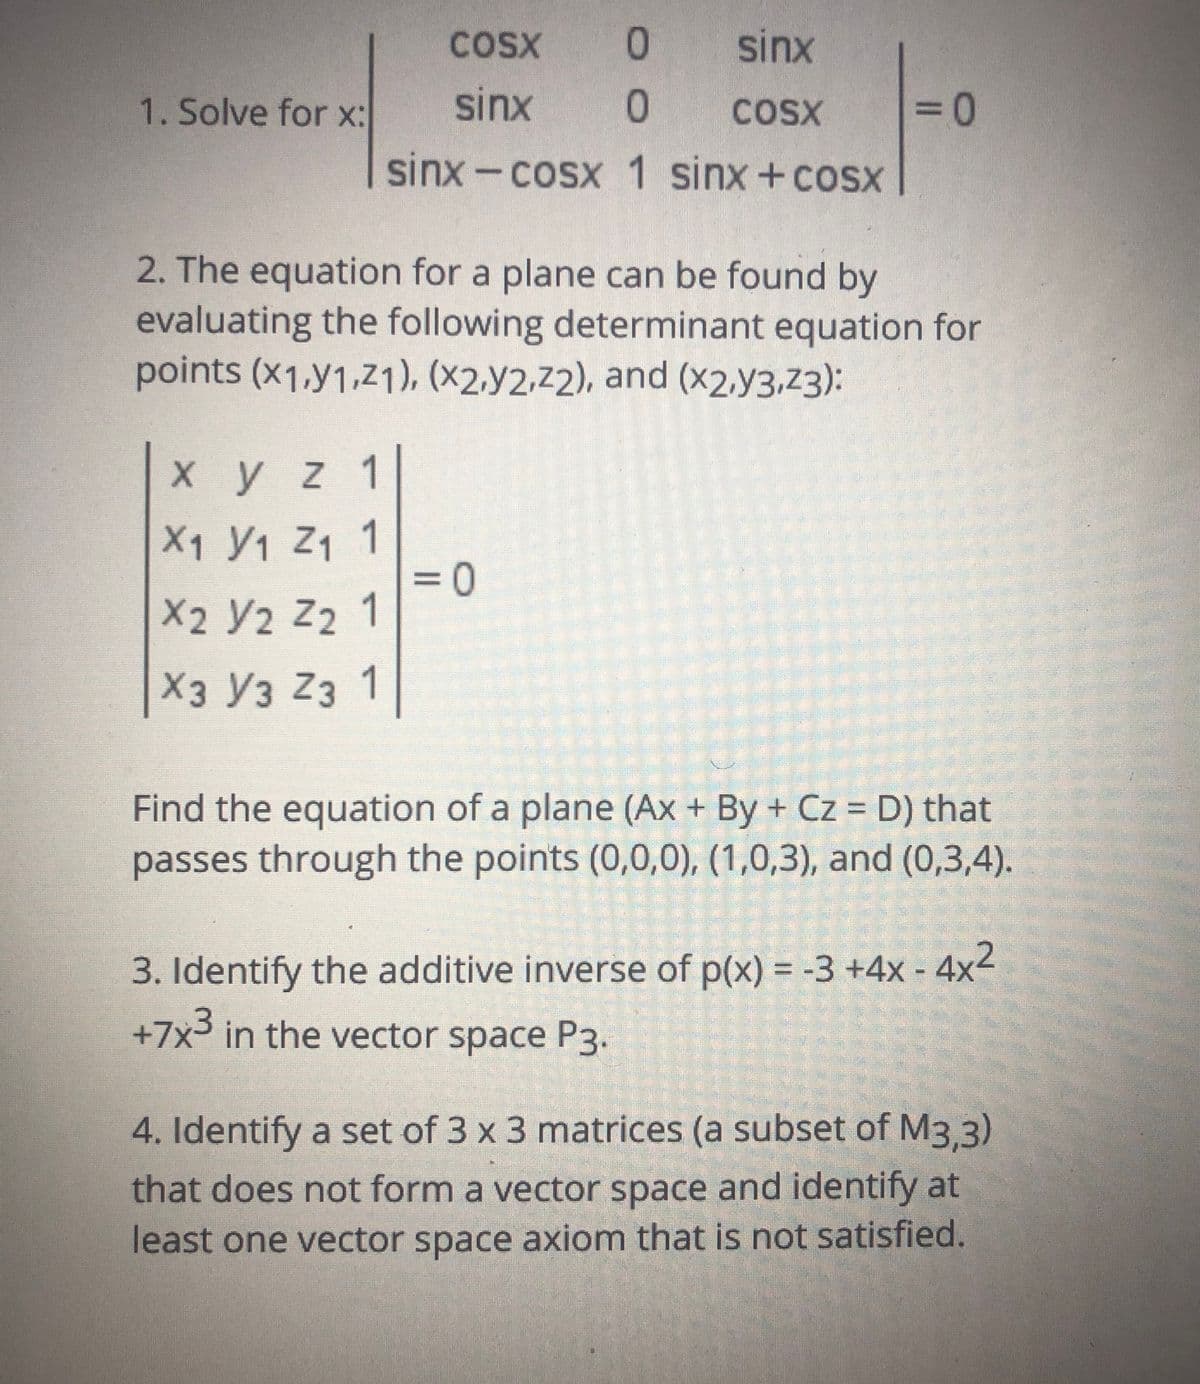 COSX
0.
sinx
1. Solve for x:
sinx
COSX
3D
sinx-cosx 1 sinx+coSX
2. The equation for a plane can be found by
evaluating the following determinant equation for
points (x1,y1,Z1), (×2.y2,z2), and (x2,y3,z3):
Xyz 1
X1 Y1 Z1 1
3D0
X2 Y2 Z2 1
Хз Уз Z3 1
Find the equation of a plane (Ax + By + Cz = D) that
passes through the points (0,0,0), (1,0,3), and (0,3,4).
3. Identify the additive inverse of p(x) = -3 +4x - 4x2
+7x³ in the vector space P3.
4. Identify a set of 3 x 3 matrices (a subset of M3.3)
that does not form a vector space and identify at
least one vector space axiom that is not satisfied.
